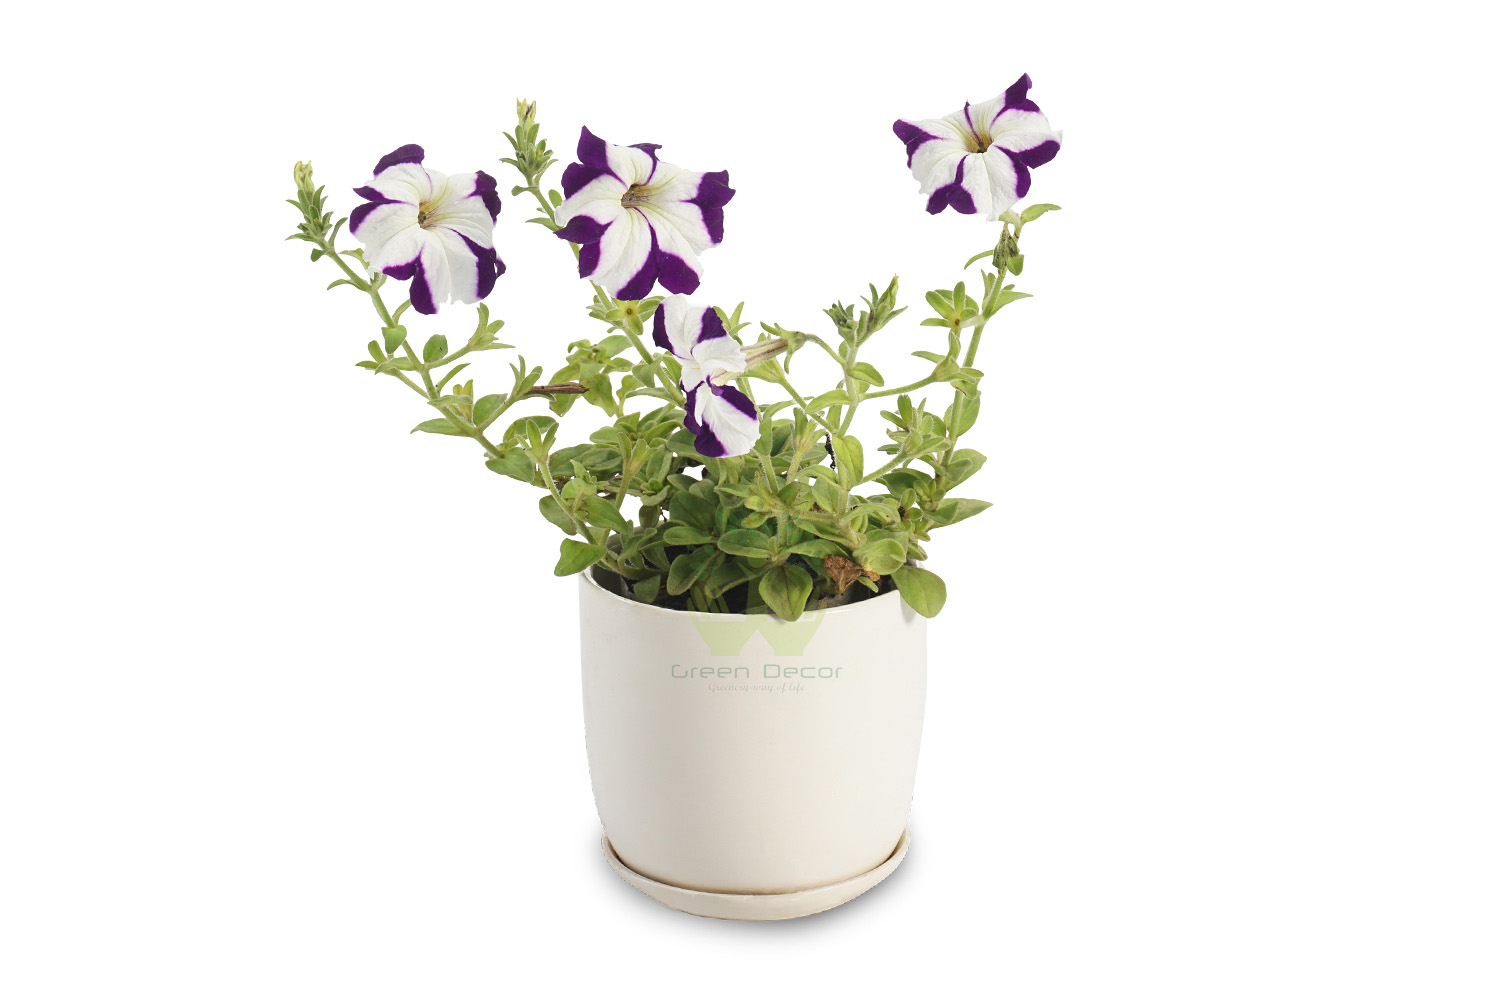 Buy Petunia Voilet Front View , White Pots and seeds in Delhi NCR by the best online nursery shop Greendecor.